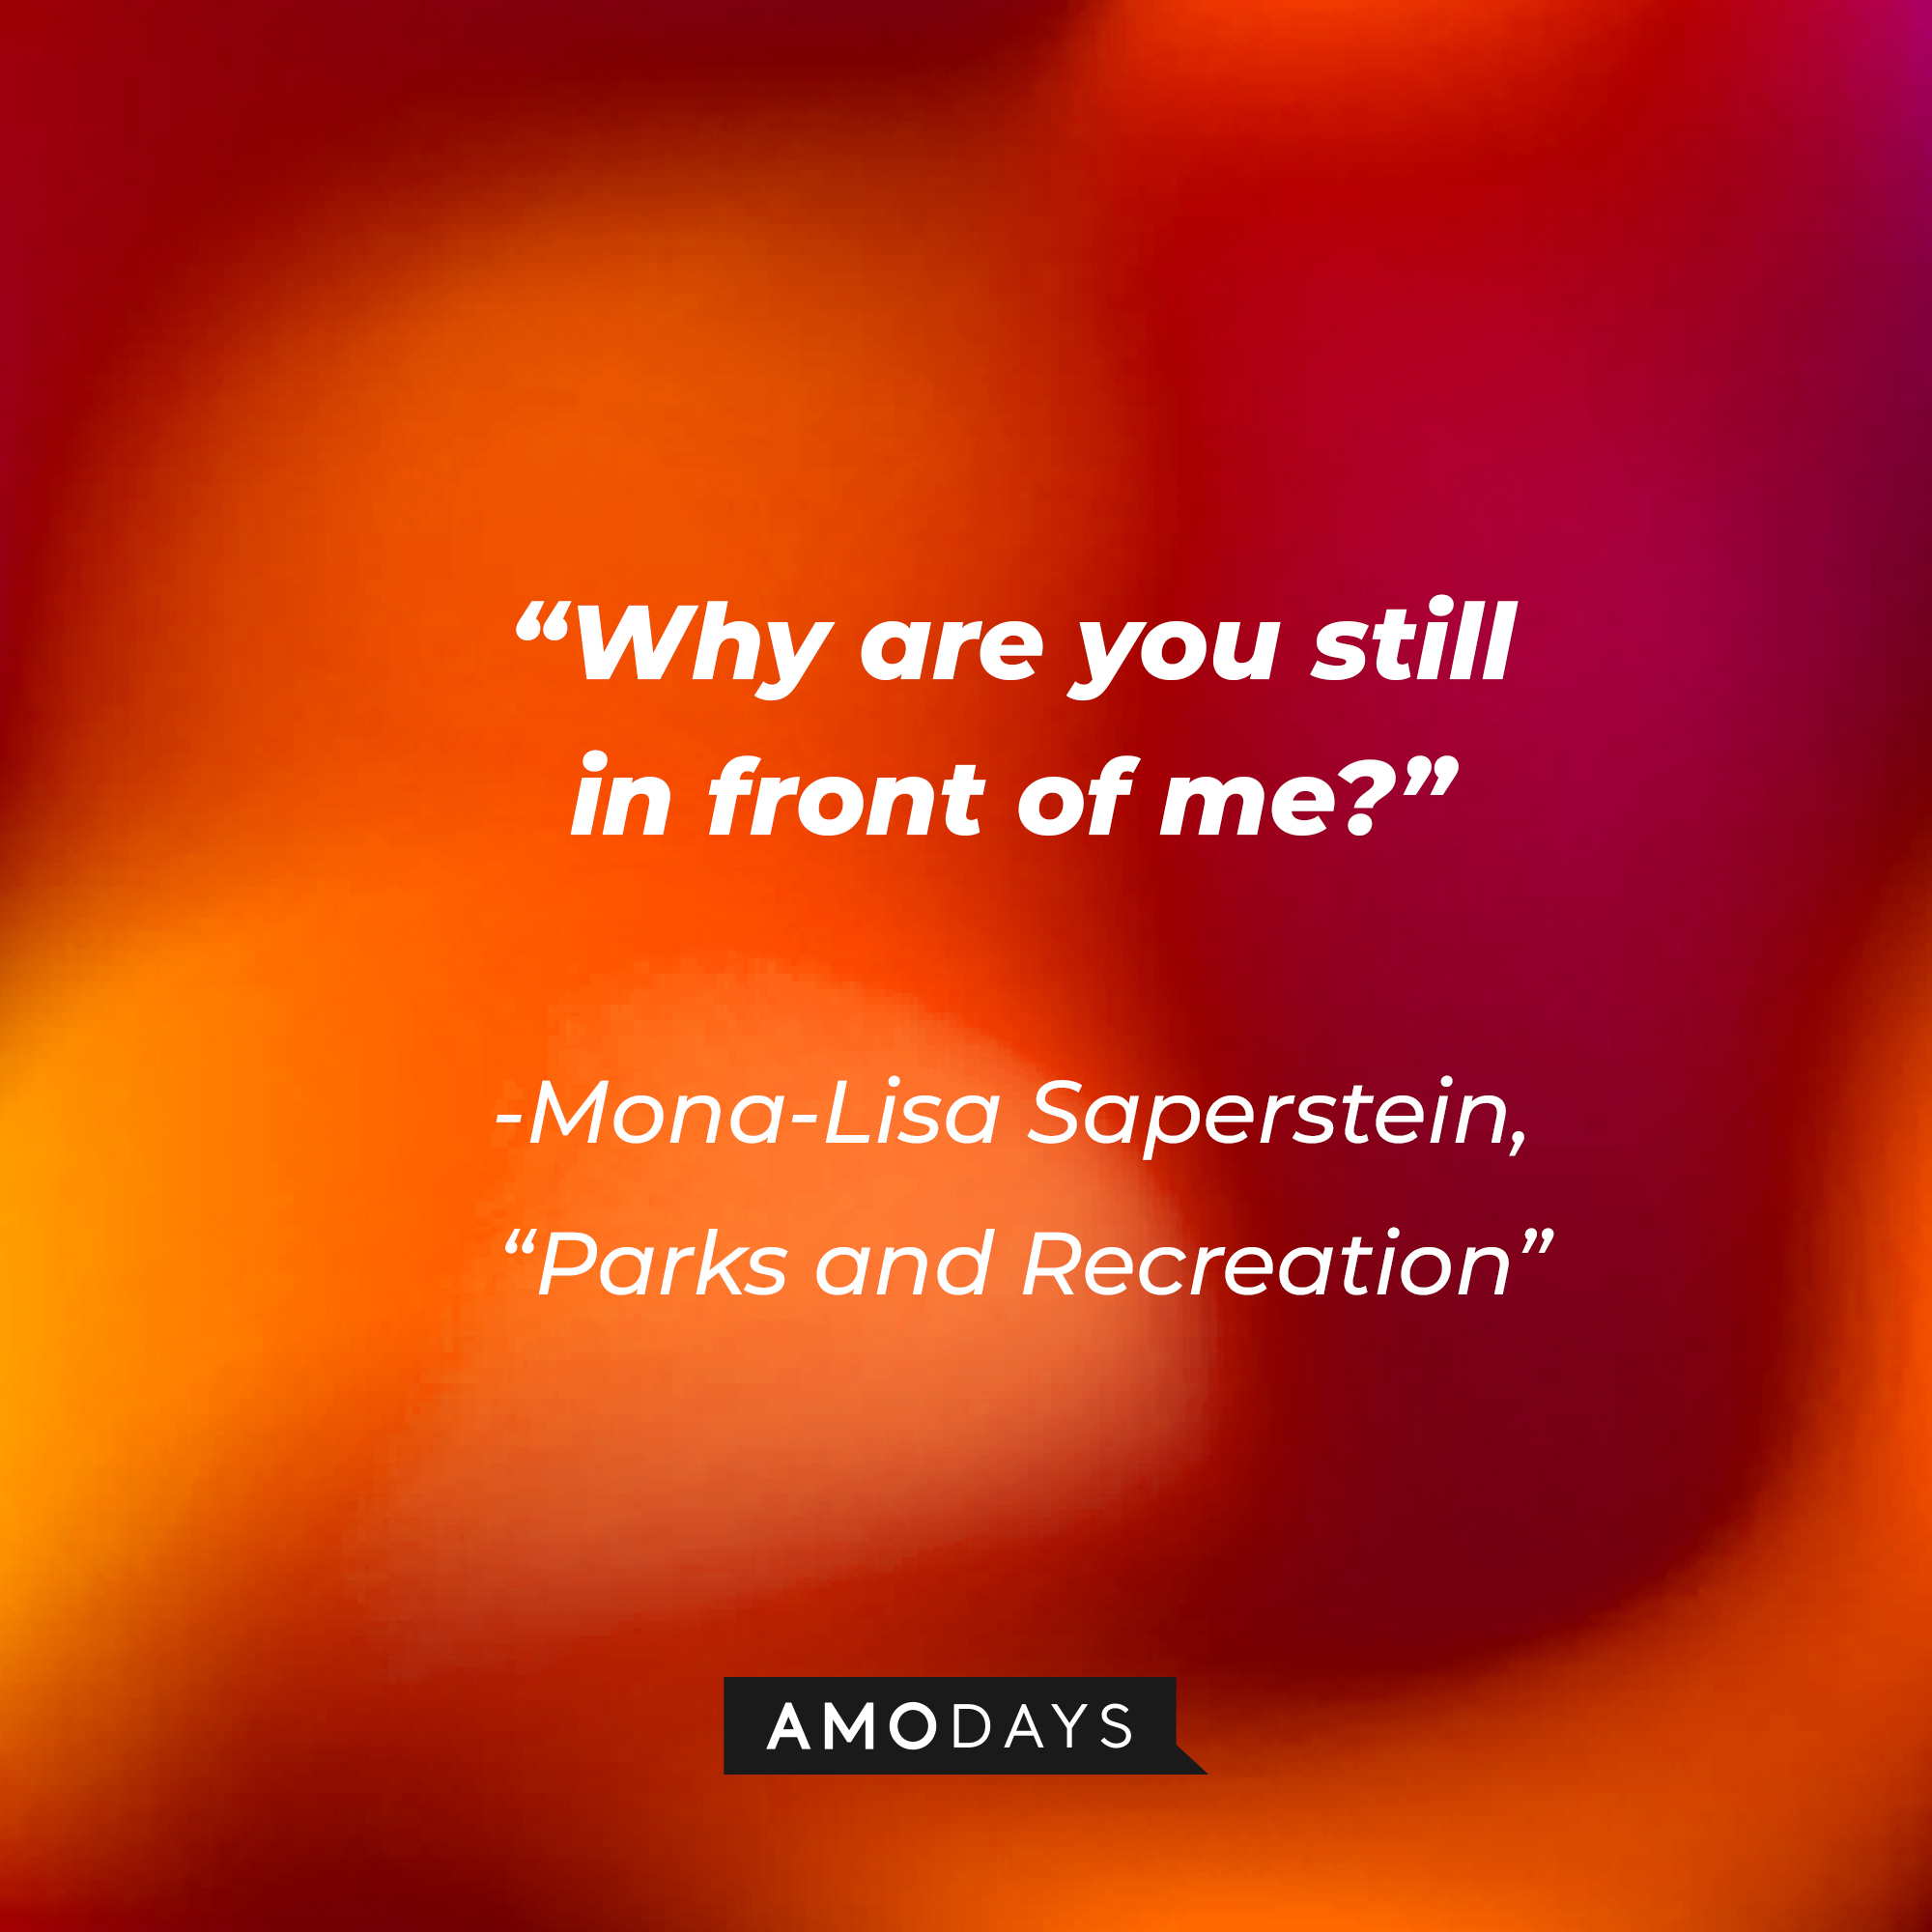 Mona-Lisa Saperstein's quote on "Parks and Recreation:" “Why are you still in front of me?" | Source: AmoDays